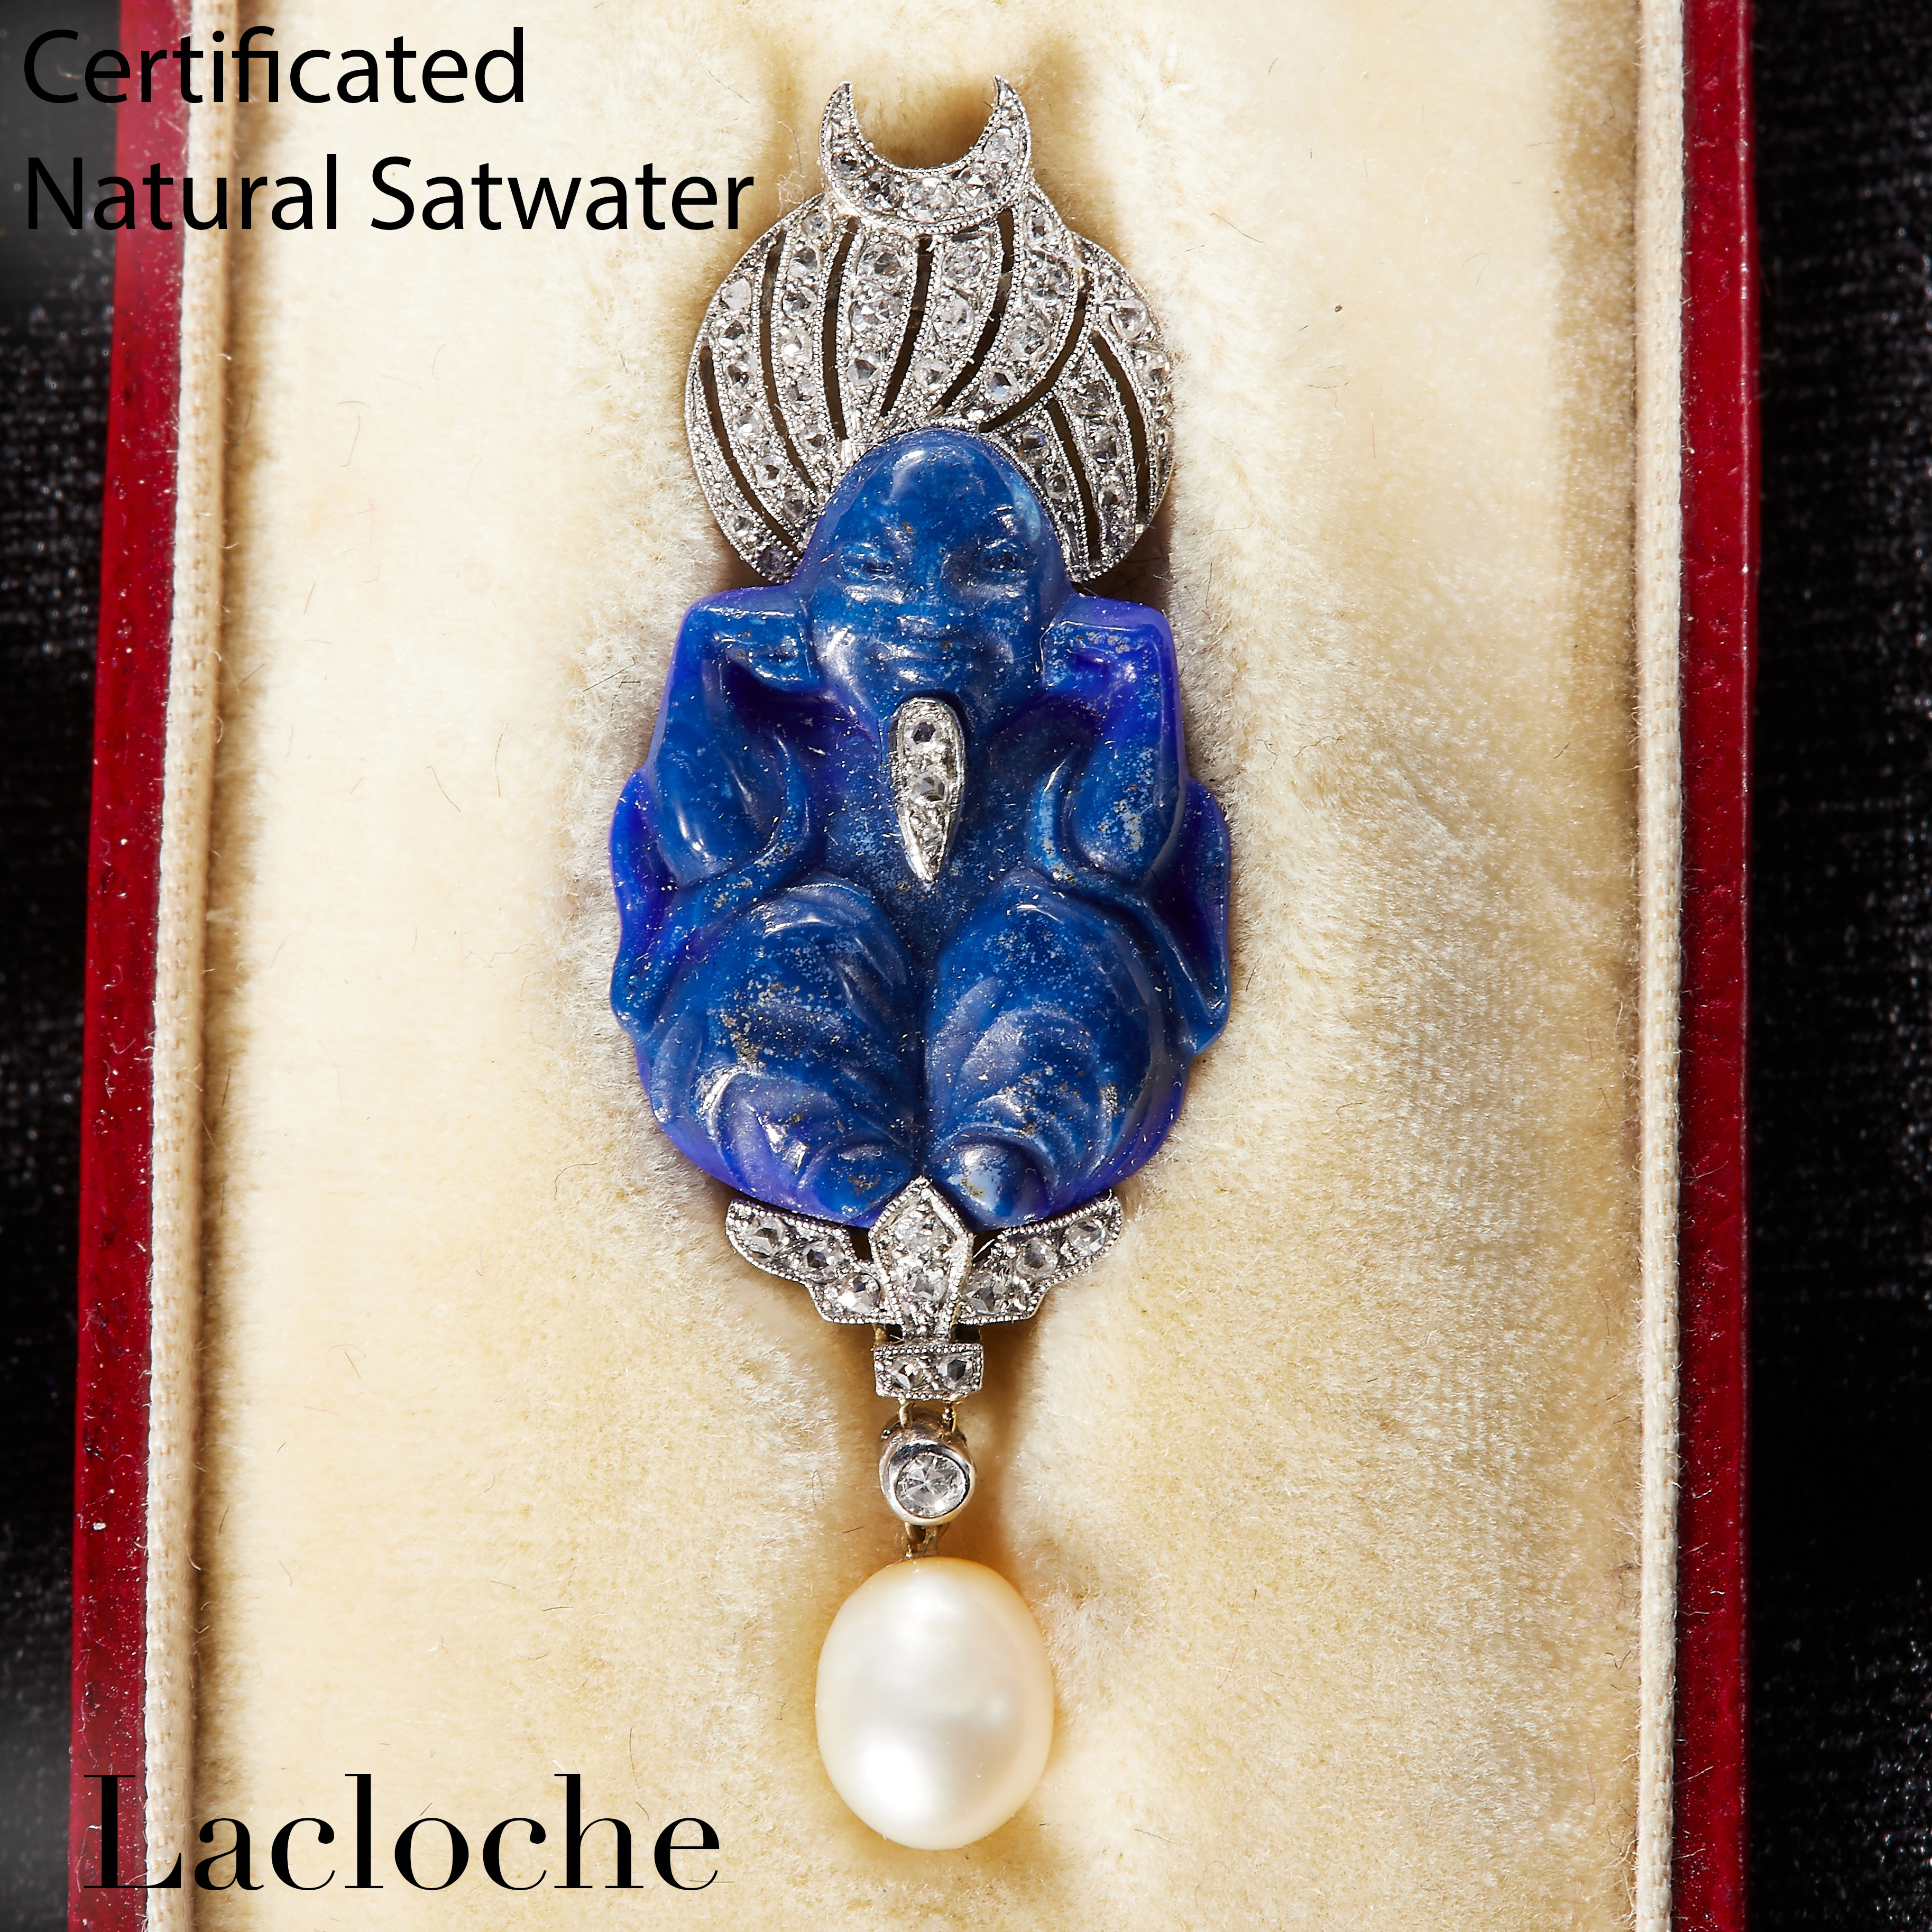 LACLOCHE FRERES, CERTIFICATED NATURAL SALTWATER PEARL, DIAMOND AND LAPIS LAZULI BUDDHA BROOCH